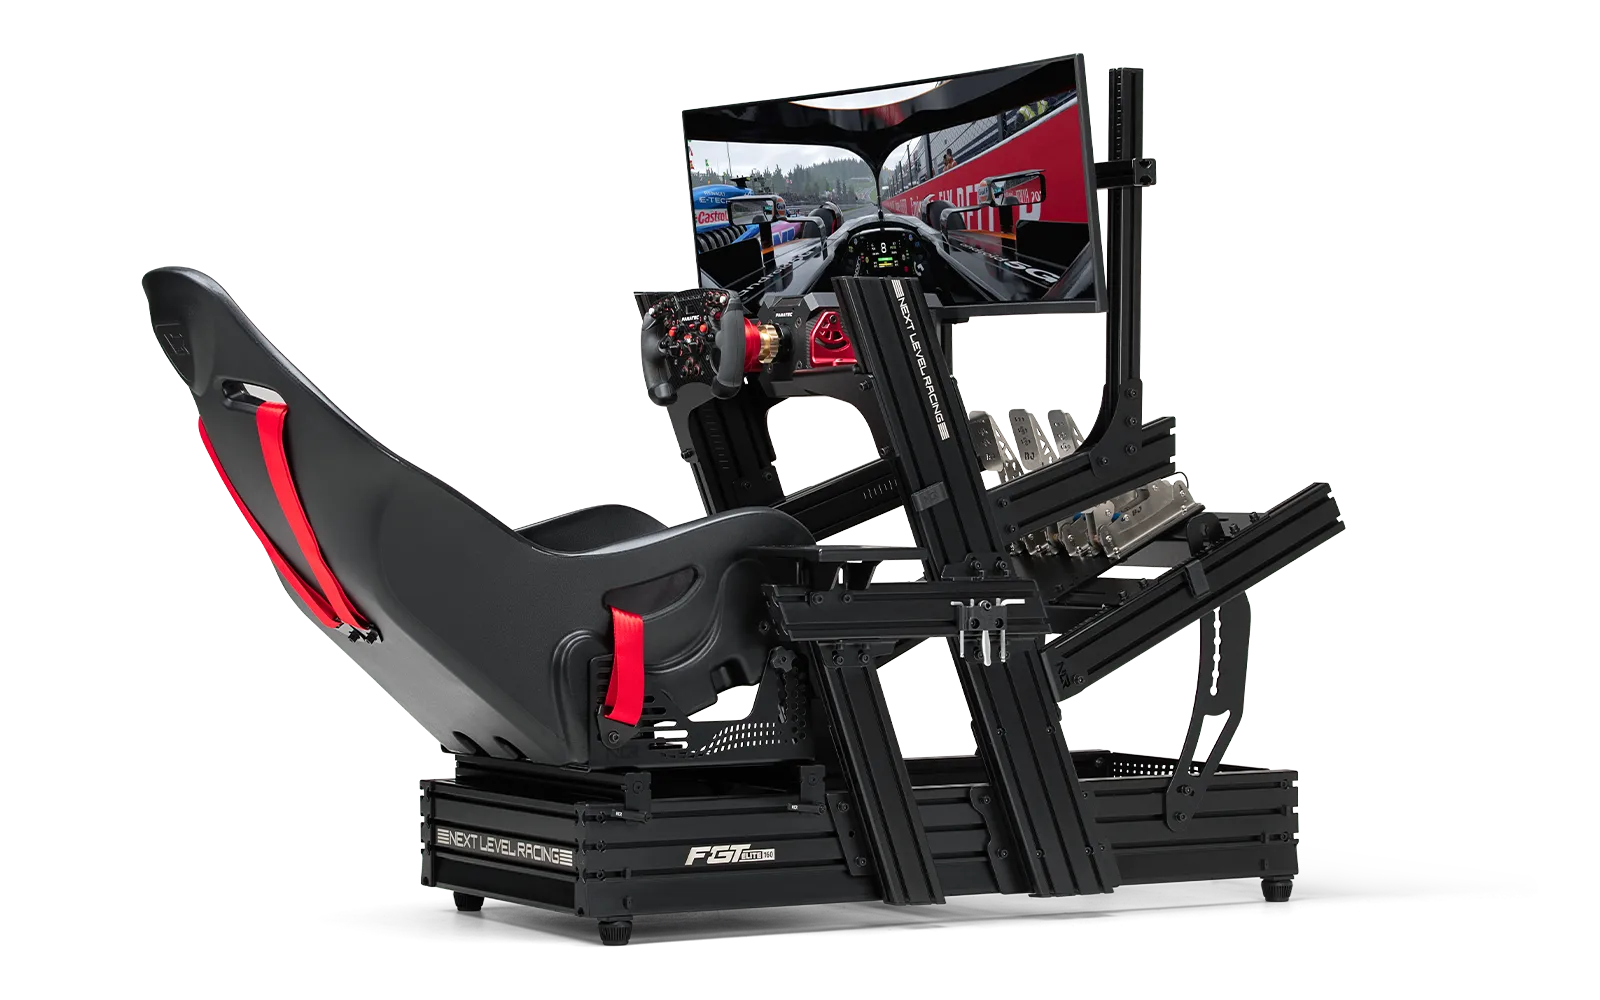 F-GT Elite Front & Side Mount Edition - Next Level Racing